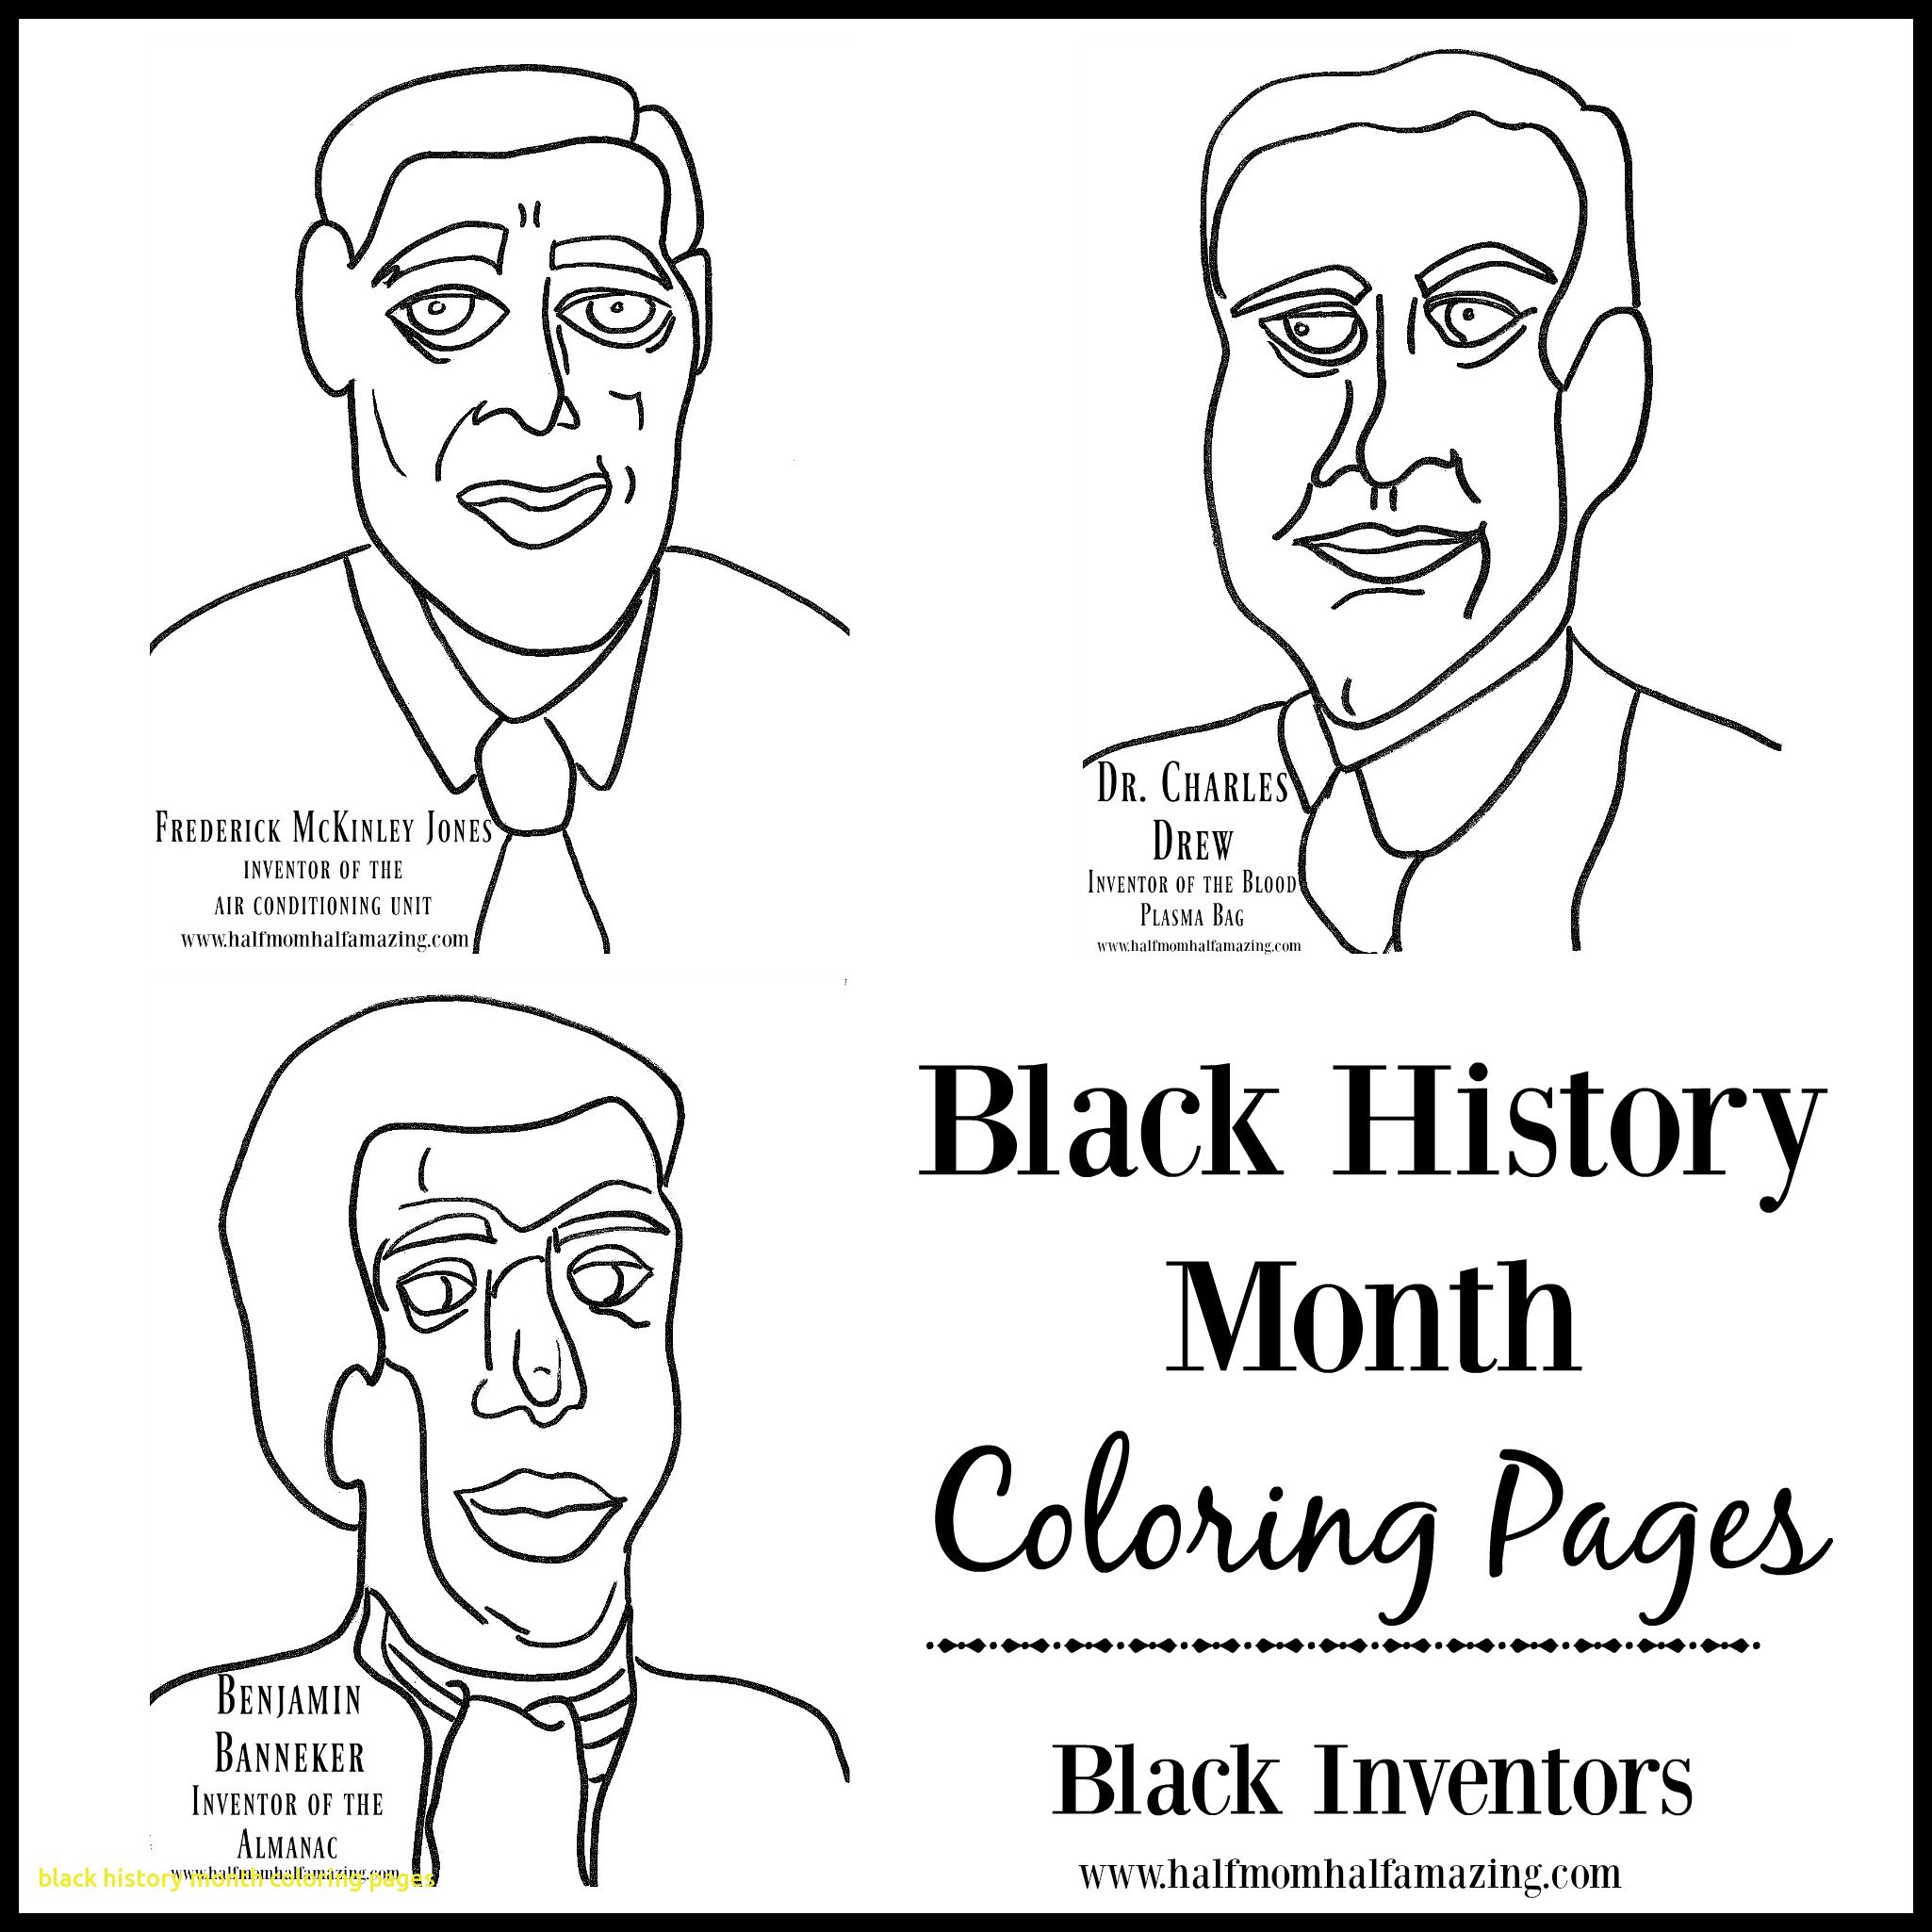 Black History Month Coloring Pages For Kindergarten 27 Best icon coloring pages images